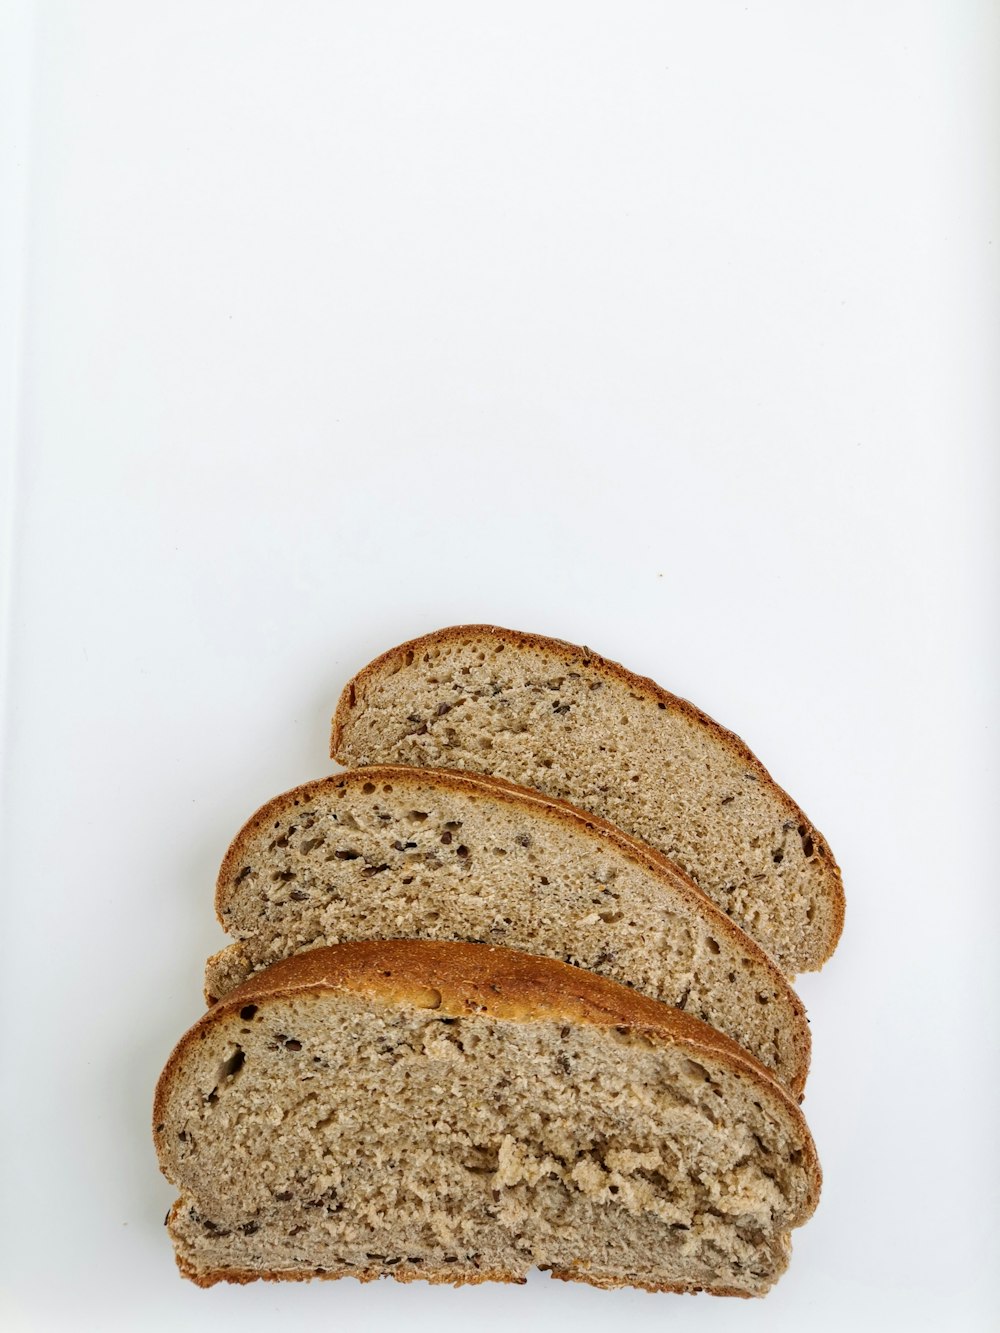 a loaf of whole wheat bread on a white surface